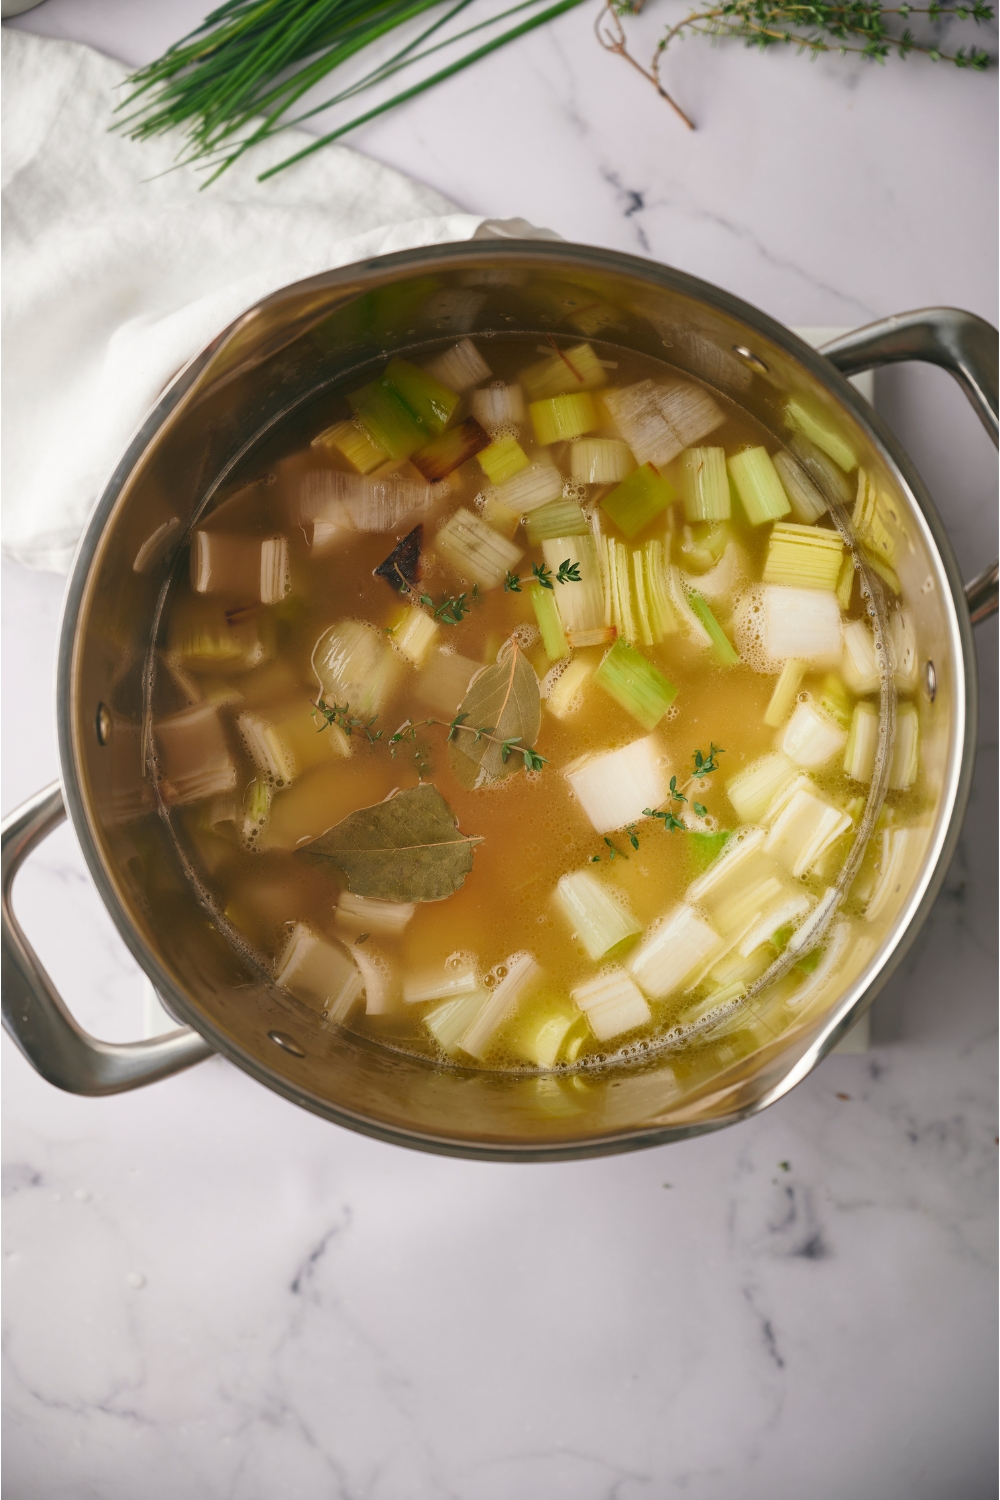 Chopped leeks and potatoes in broth in a pot.